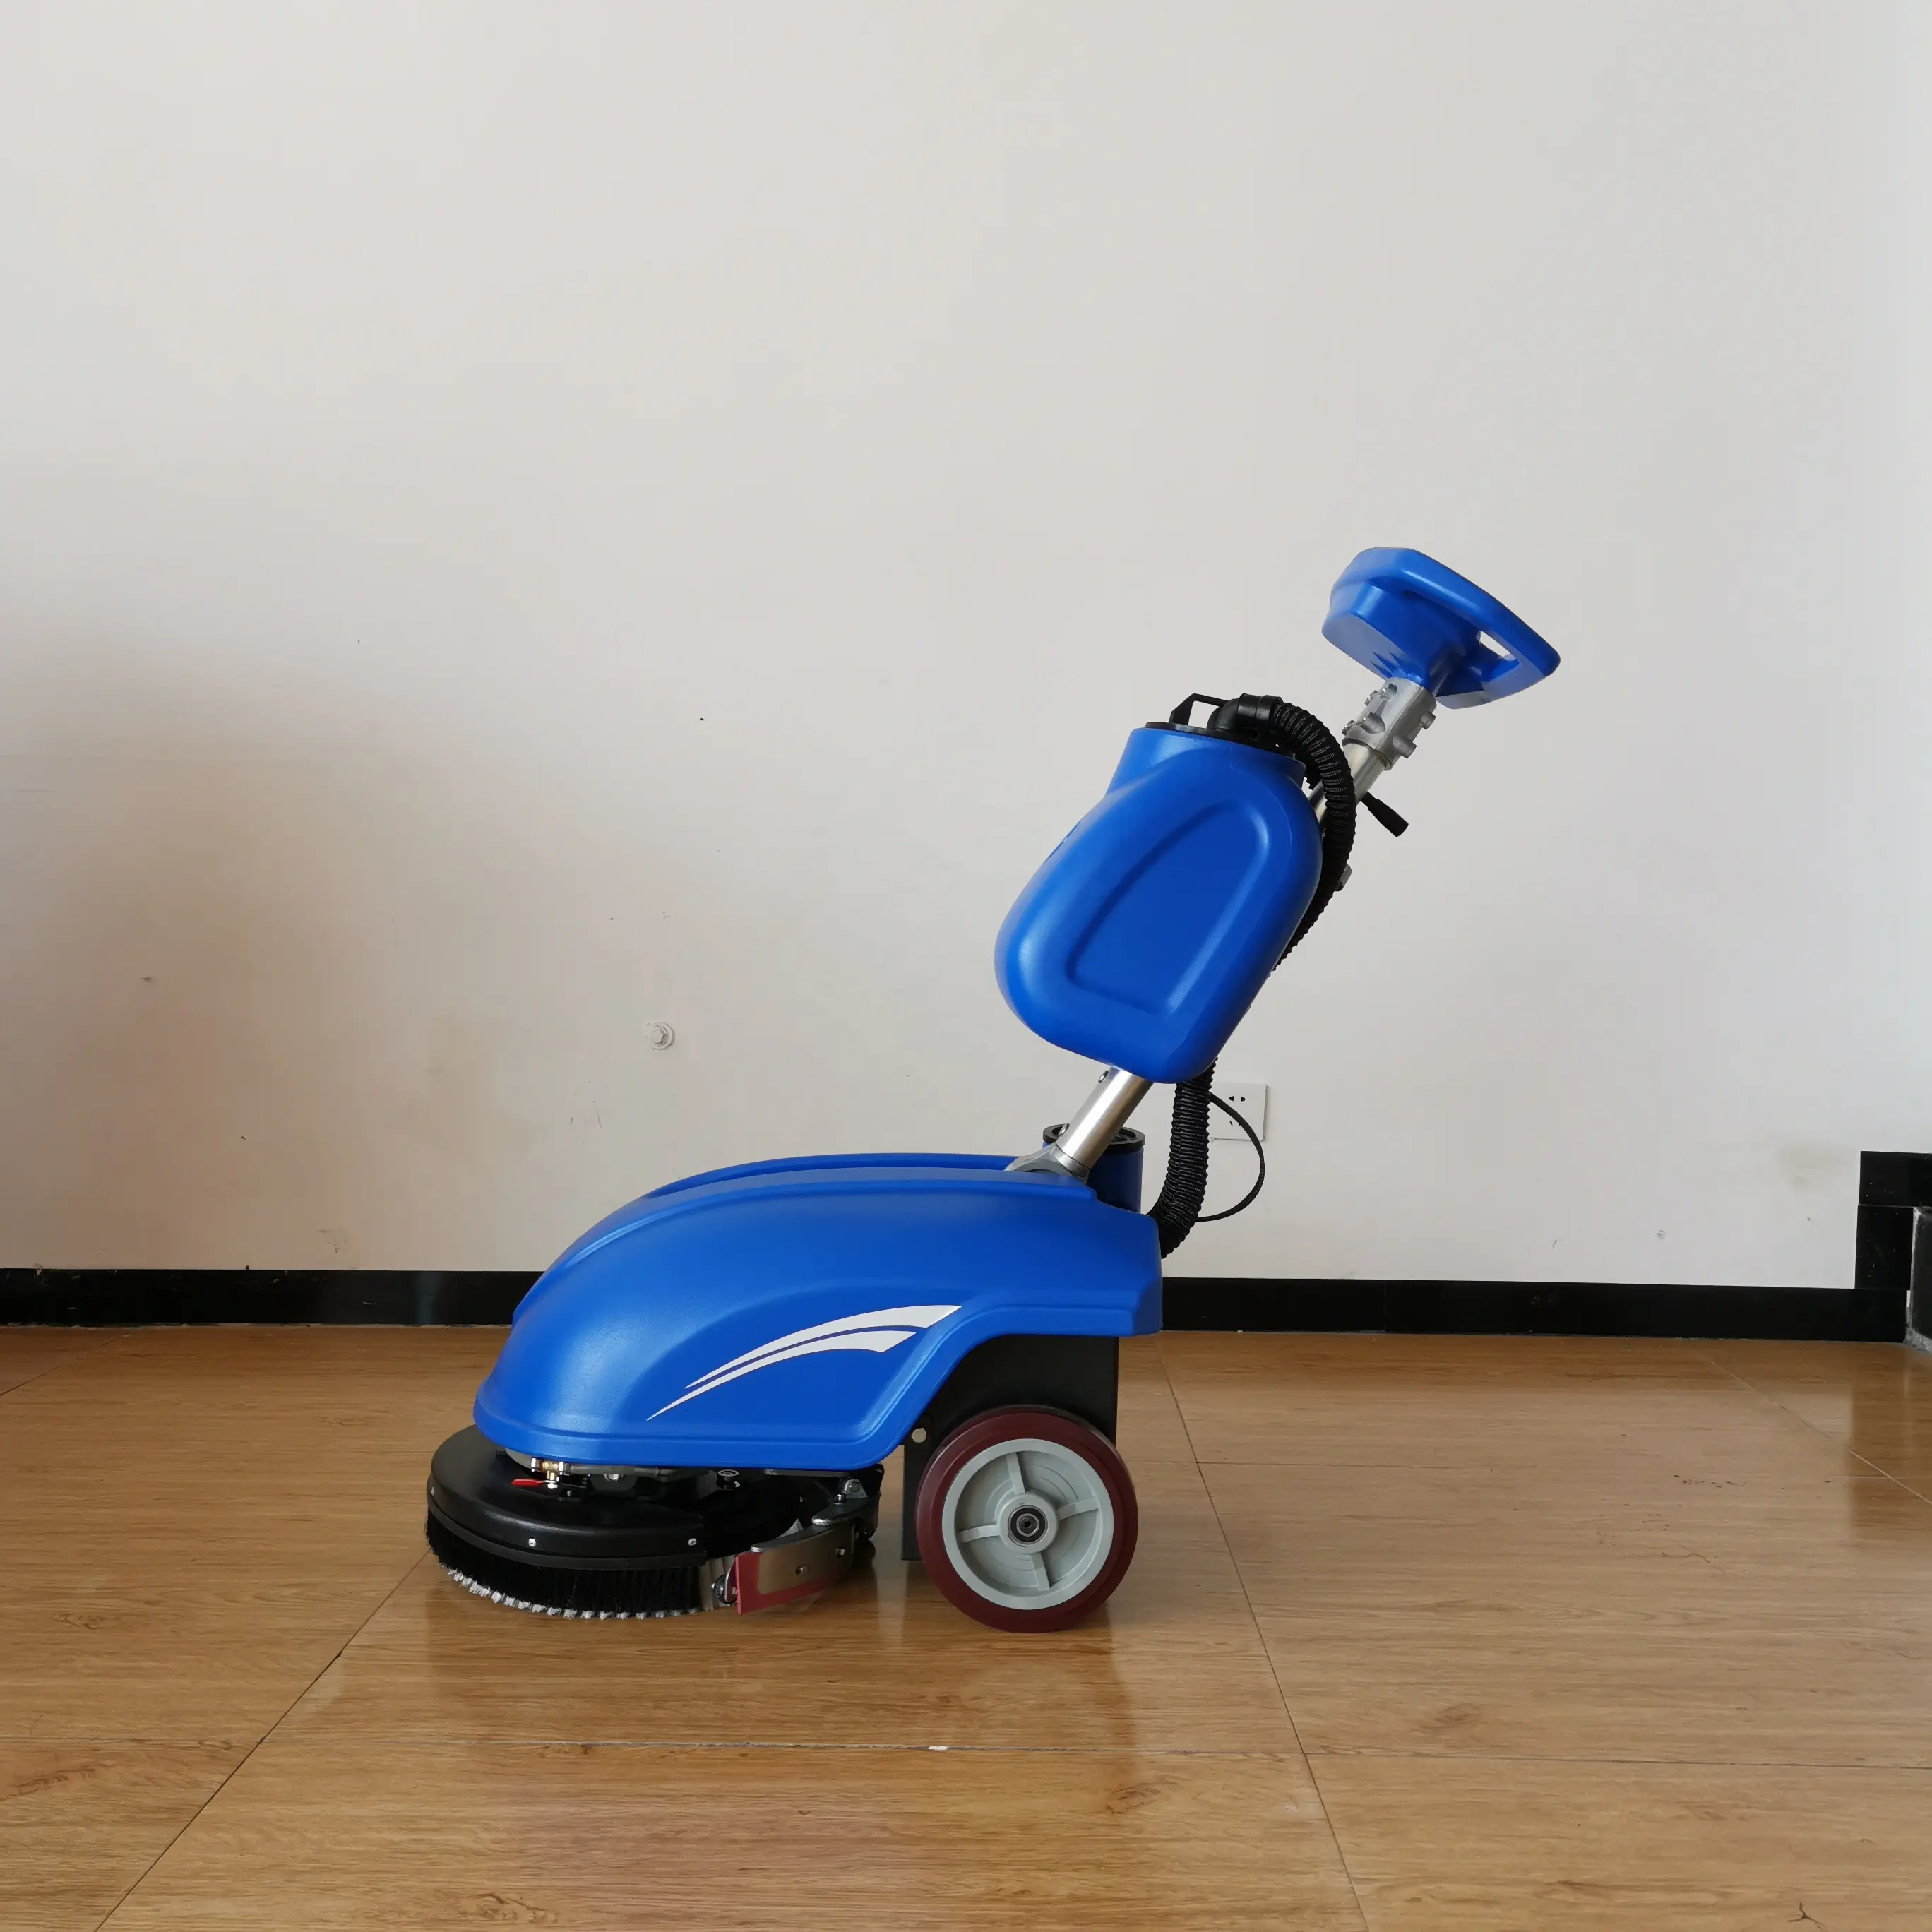 Clean Floor Scrubber Machine VOL-350 Battery Powered Hot Sell Floor Cleaning Machine For Home Scrubber